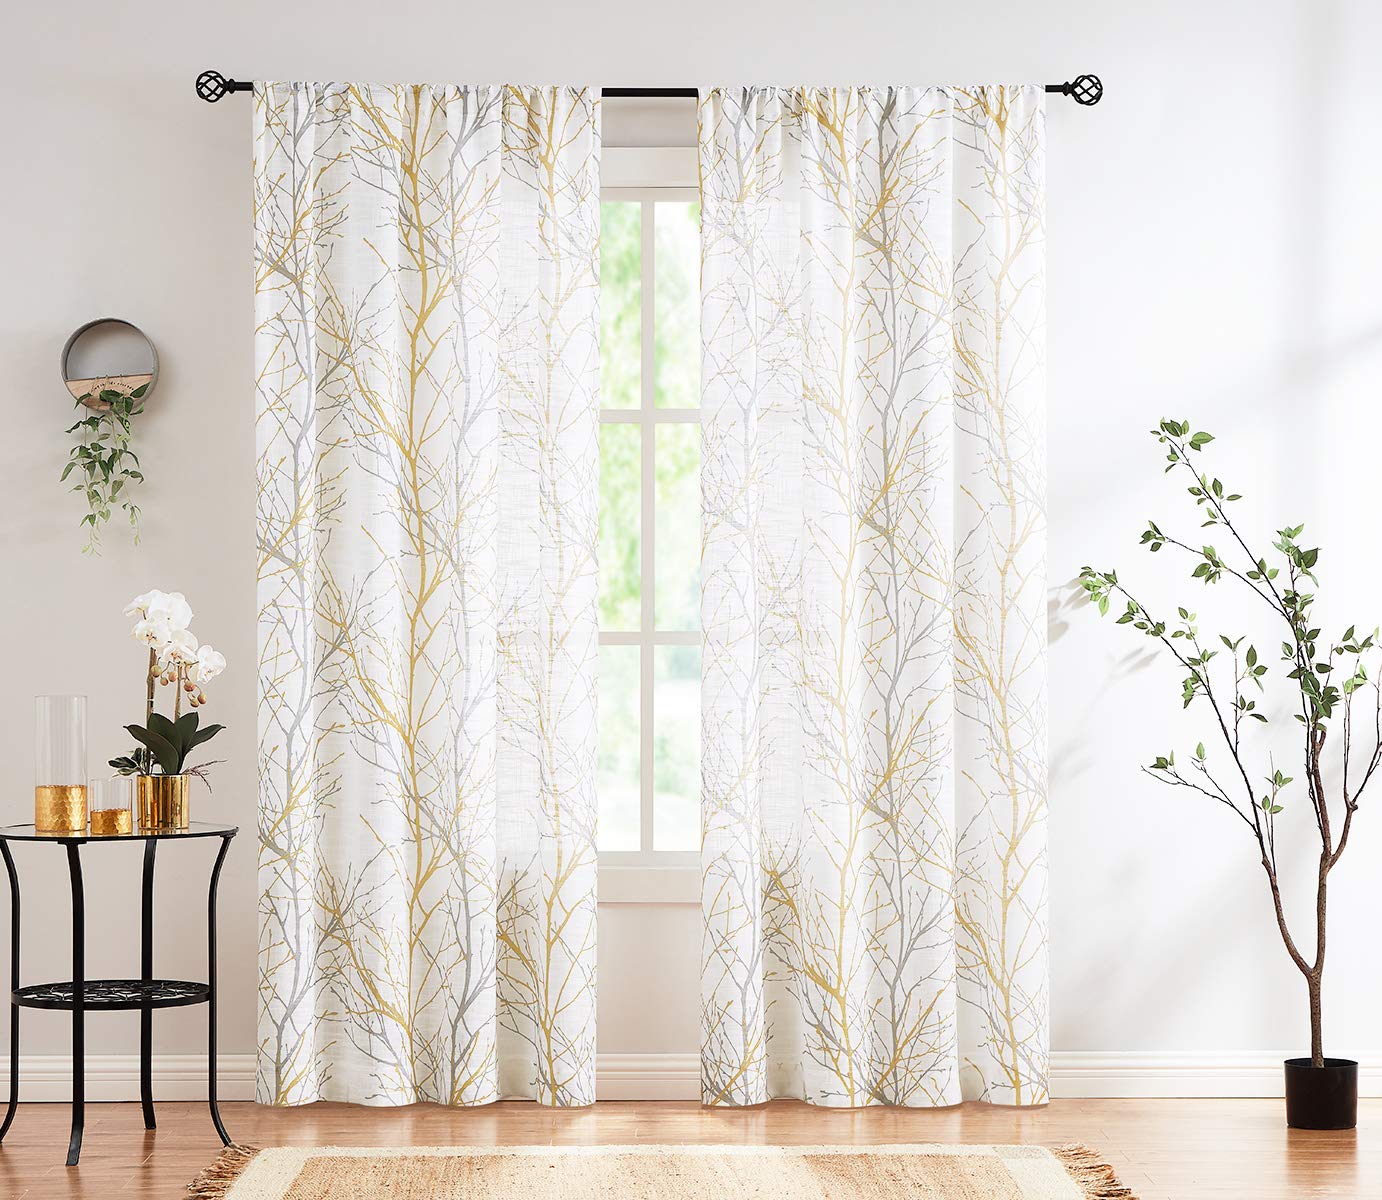 FMFUNCTEX Print Yellow Grey White Curtains for Living Room Linen Textured Tree Branches Pattern Window Treatment Set for Bedroom Window Drapes 50" W x 96" L - (2 Panels) Rod Pocket